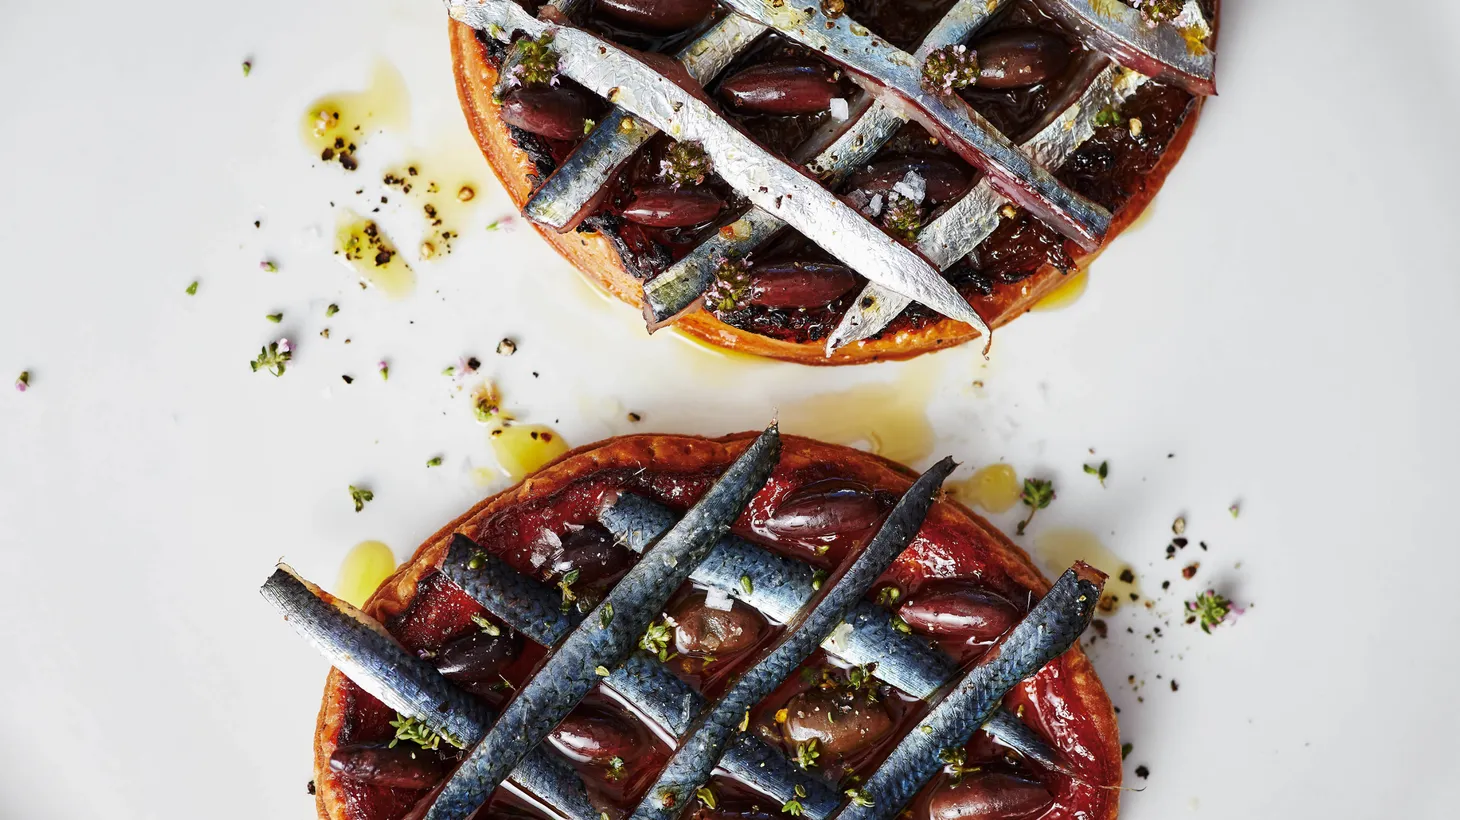 Josh Niland uses his experience working in a French restaurant in Sydney to create a pissaladiere in which he substitutes latticed sardines for anchovies to tame the salf-forward dish.